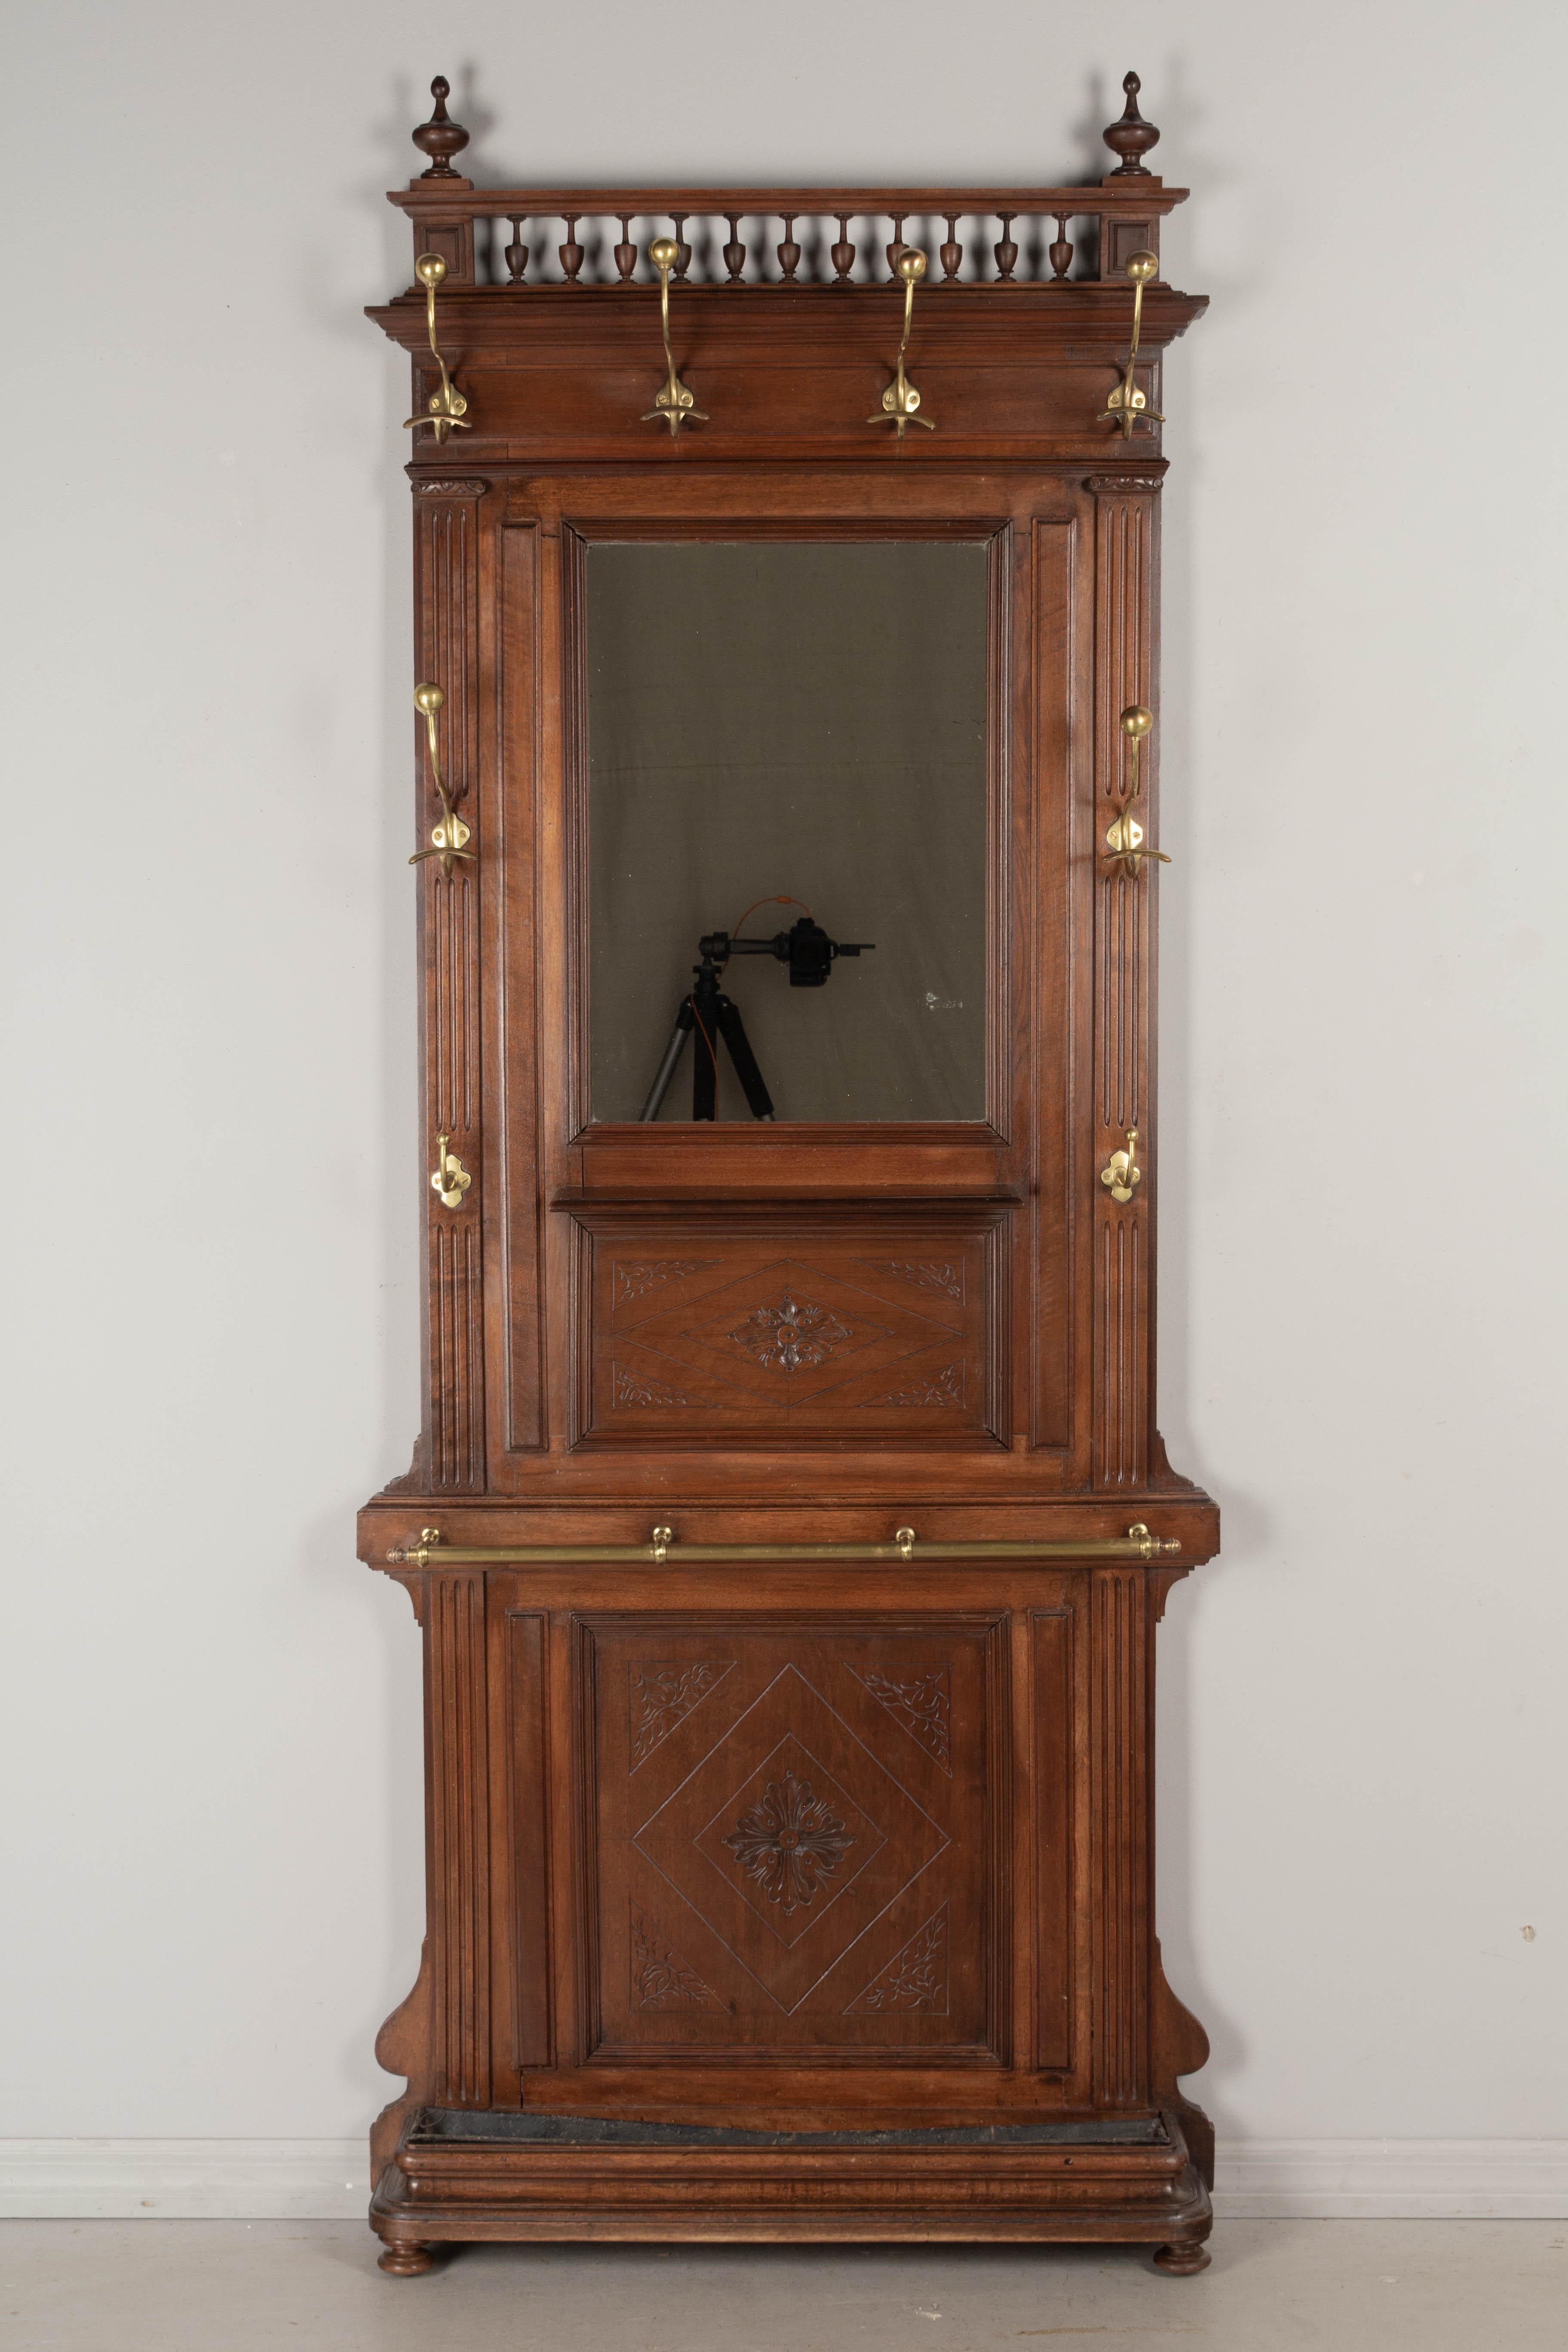 A Louis XVI style French entryway hall tree, or coat rack, with mirror. Made of solid walnut with hand carved incised decoration. Eight brass coat hooks and rail to hold umbrellas or walking canes. Small shelf in the center beneath the mirror. The